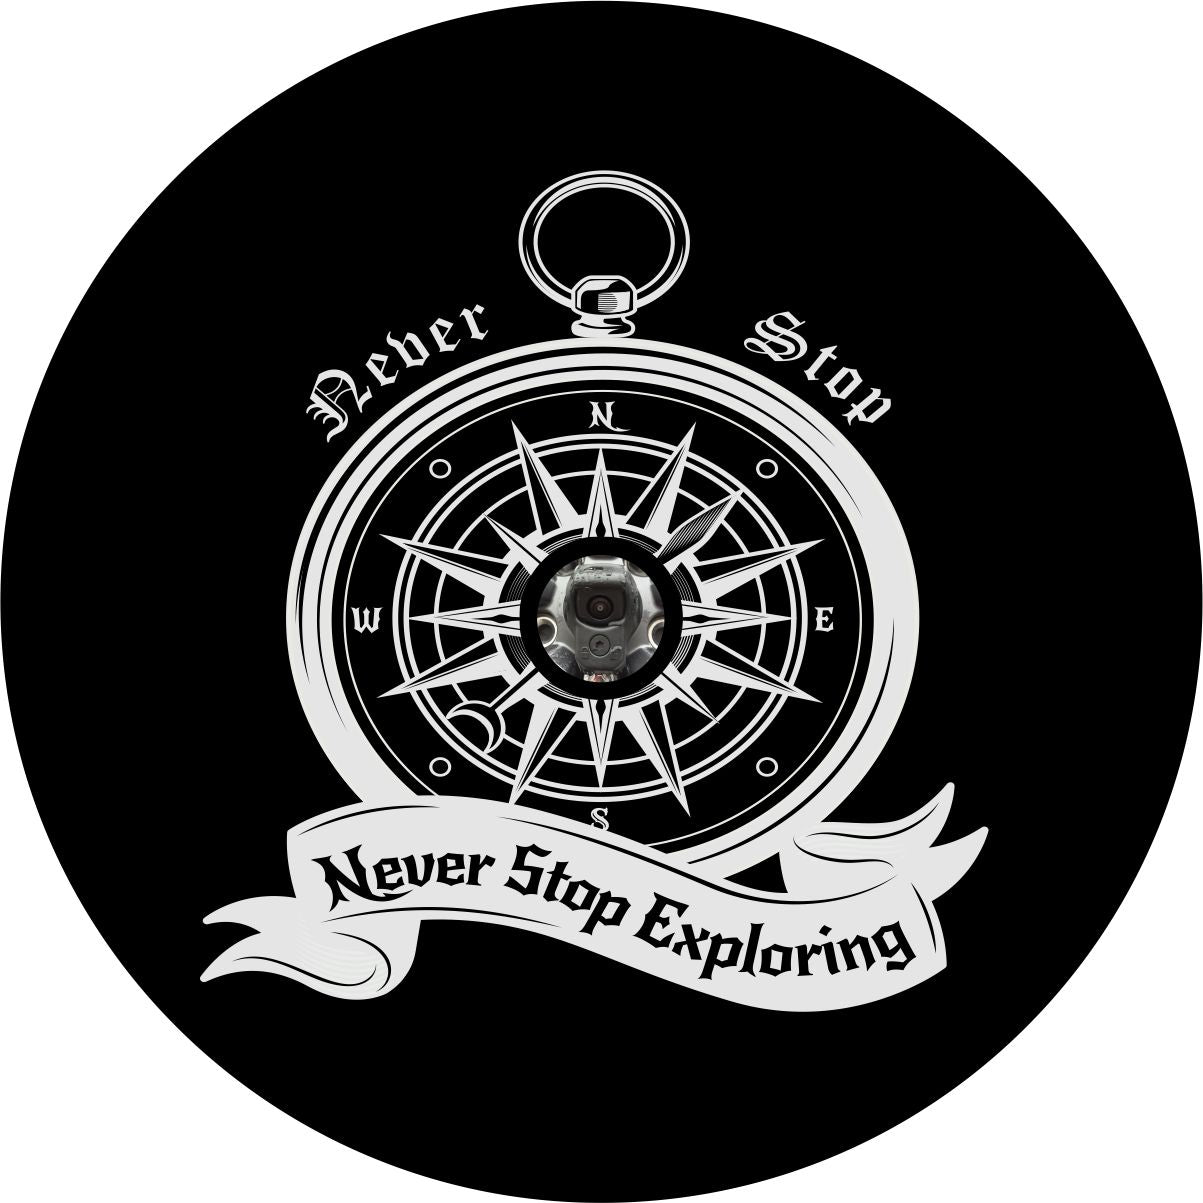 Vintage compass spare tire cover design and the saying never stop exploring. Graphic design creative spare tire cover with a back up camera.